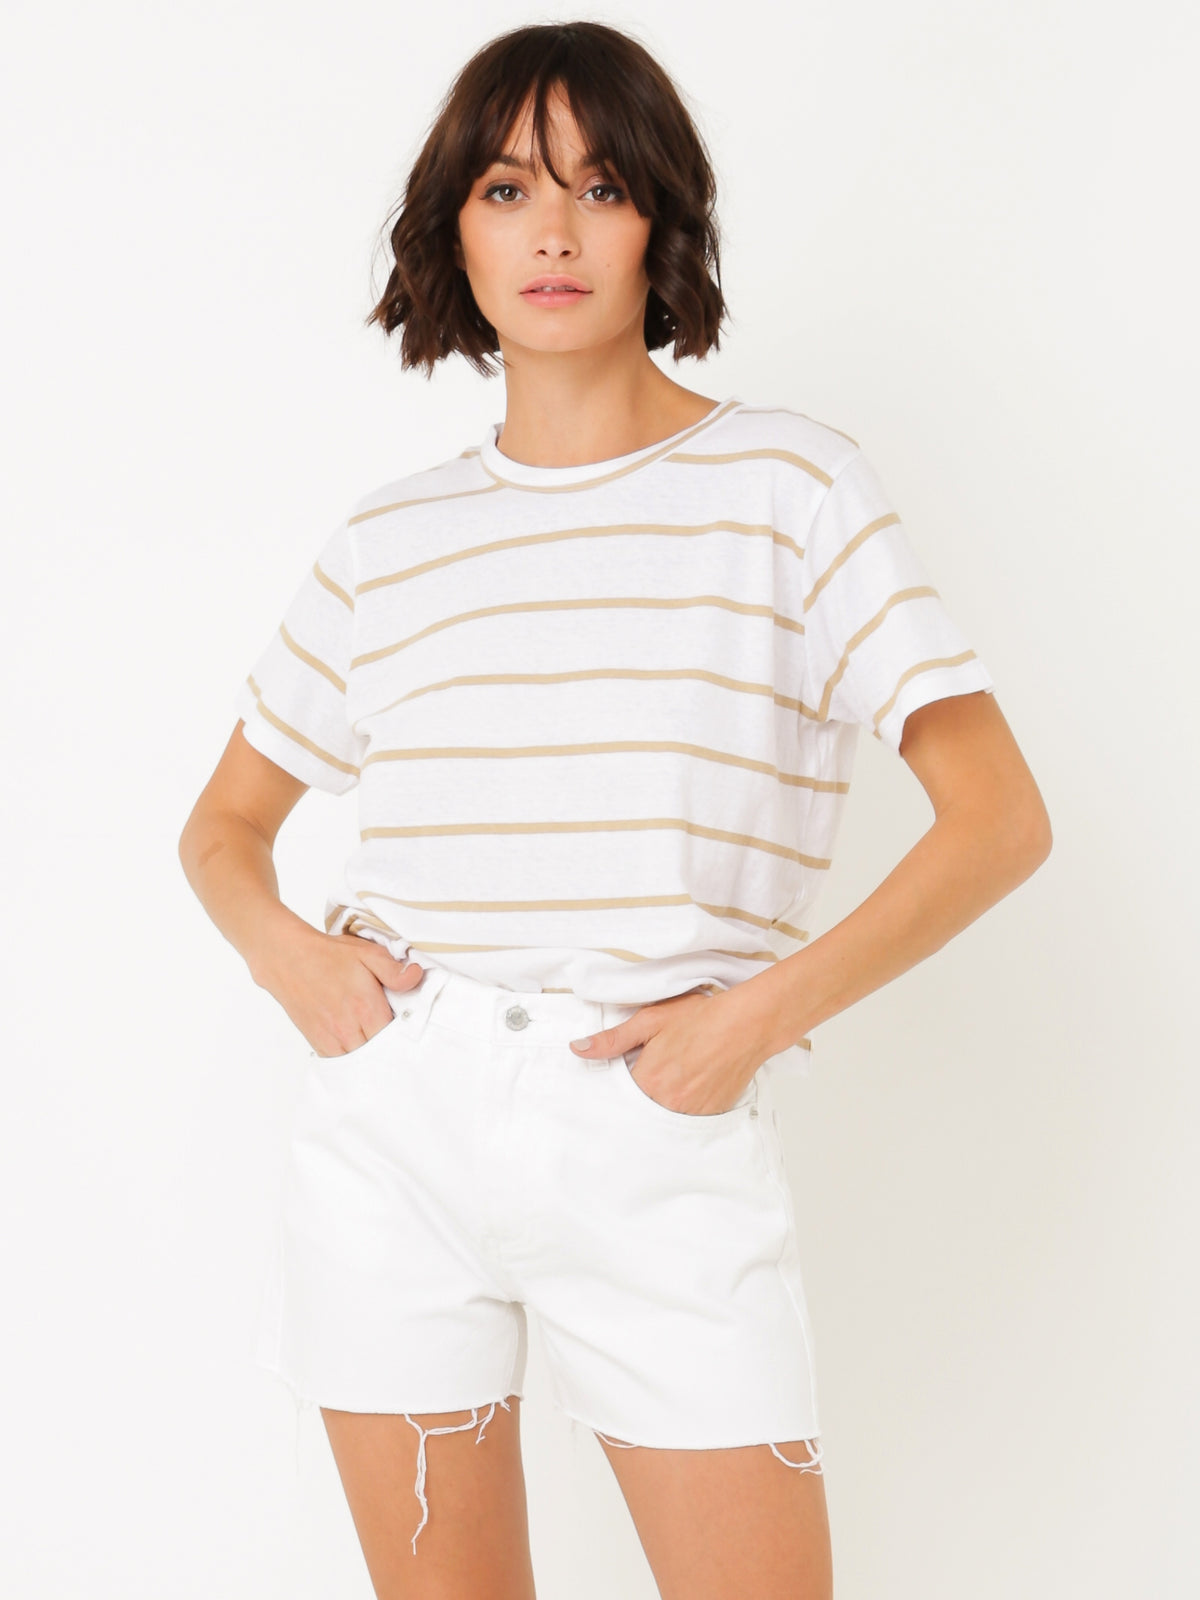 Everyday T-Shirt in Sand Stripe